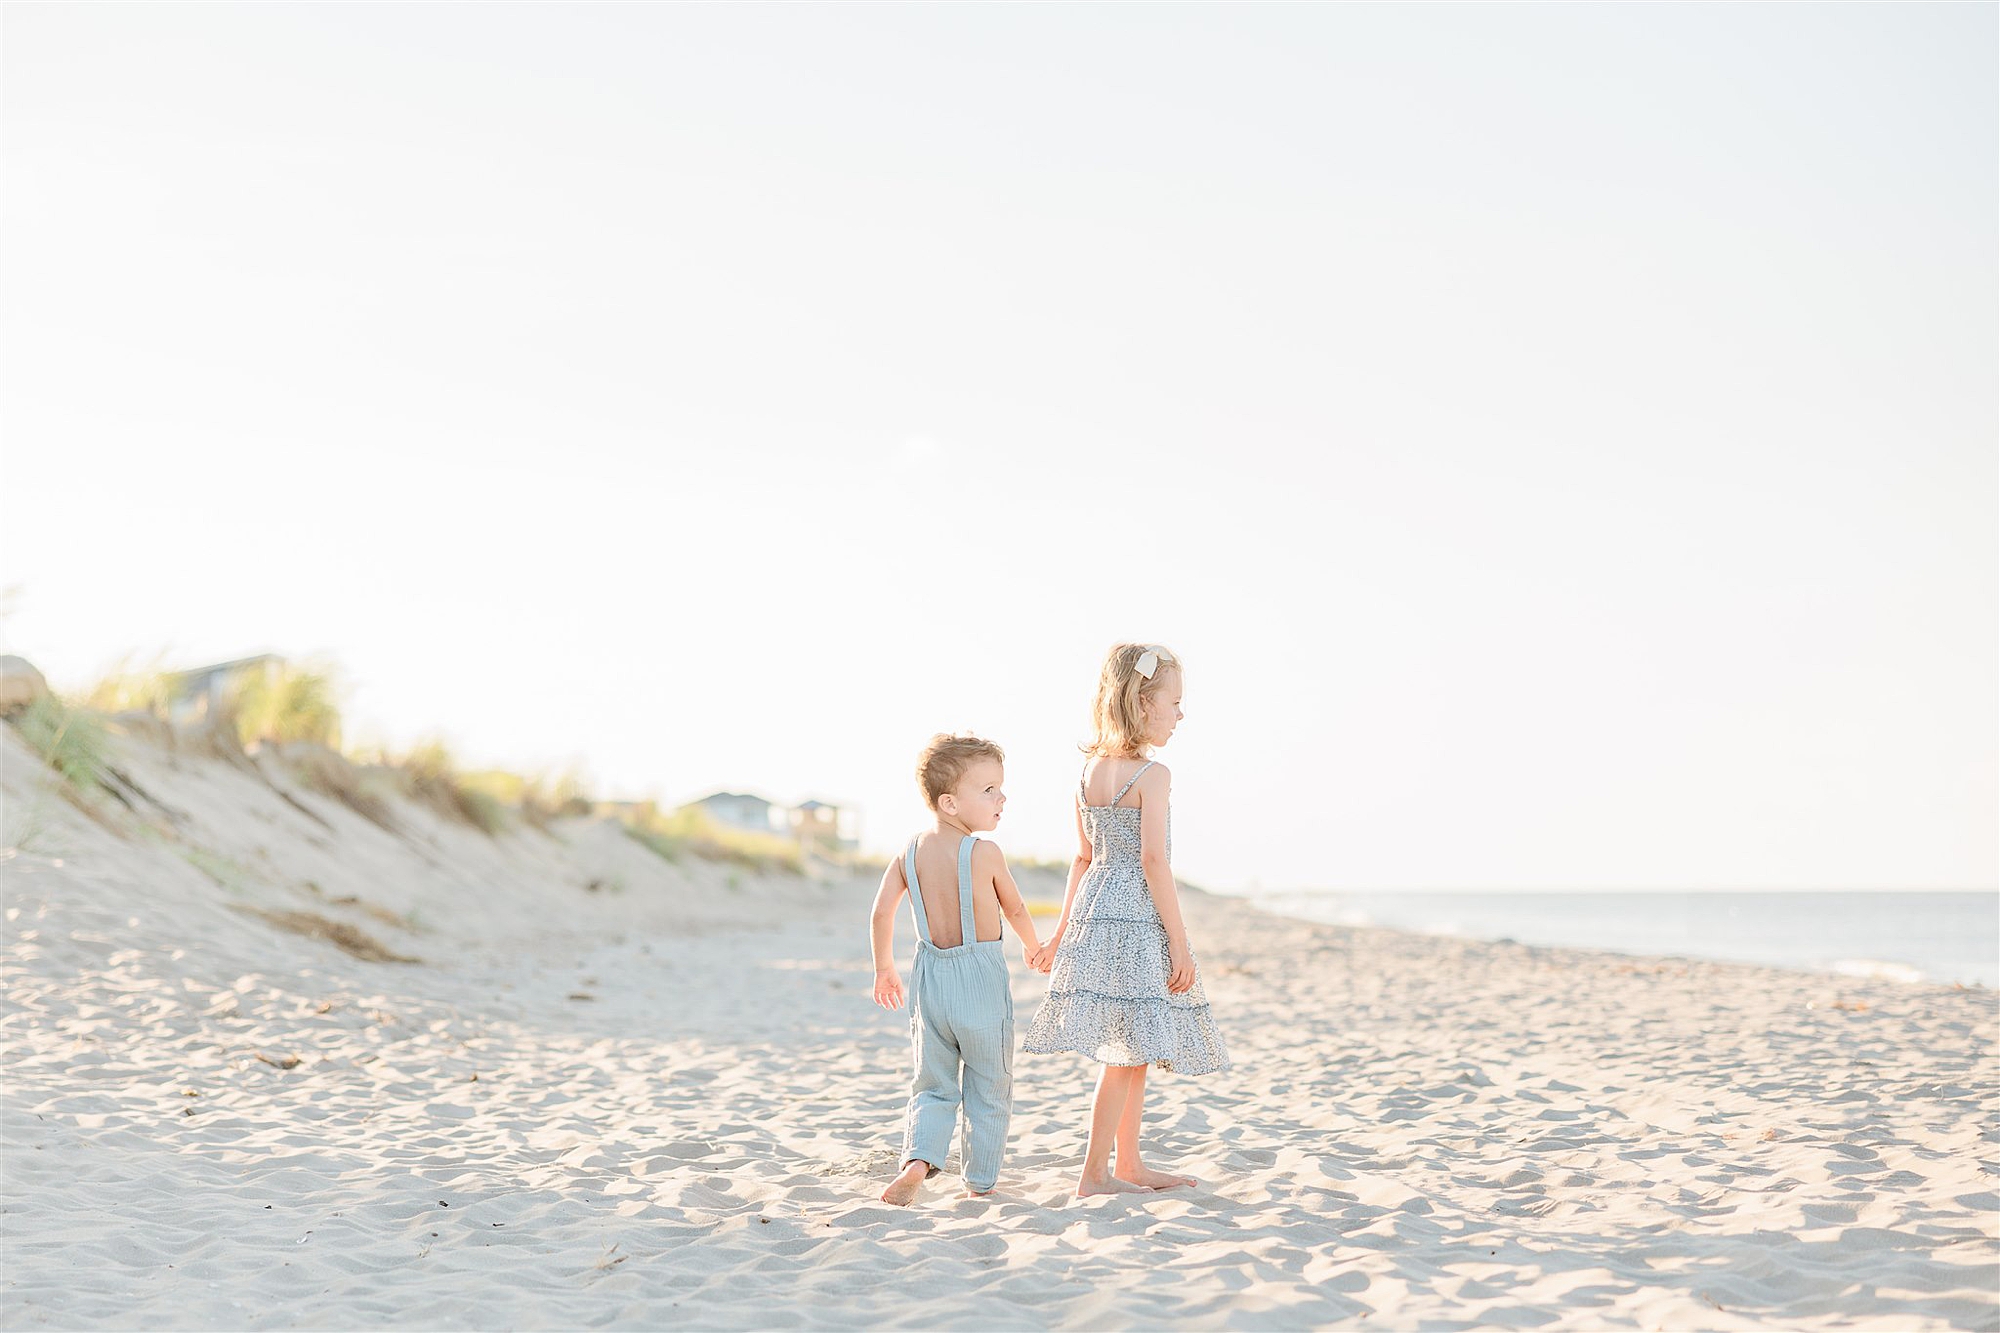 blonde girl leads boy in blue overalls across sand on beach 